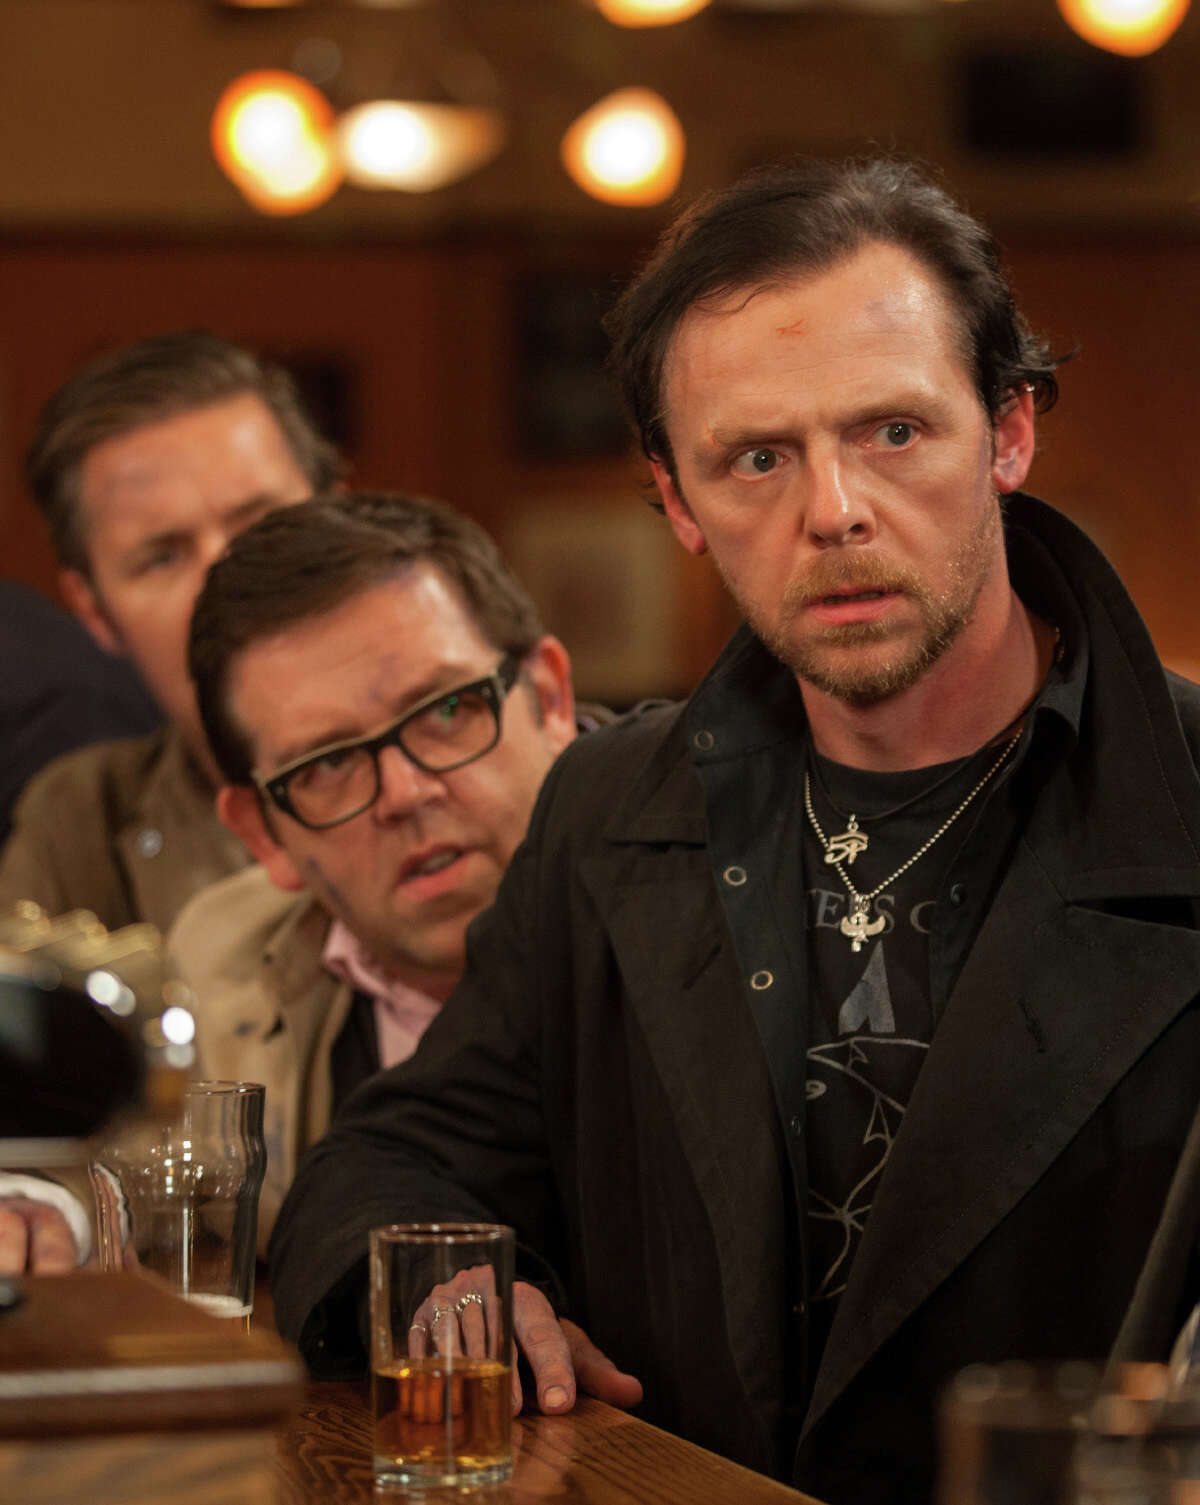 This film publicity image released by Focus Features shows Simon Pegg, right, and Nick Frost in a scene from "The World's End." (AP Photo/Focus Features, Laurie Sparham) ORG XMIT: NYET834